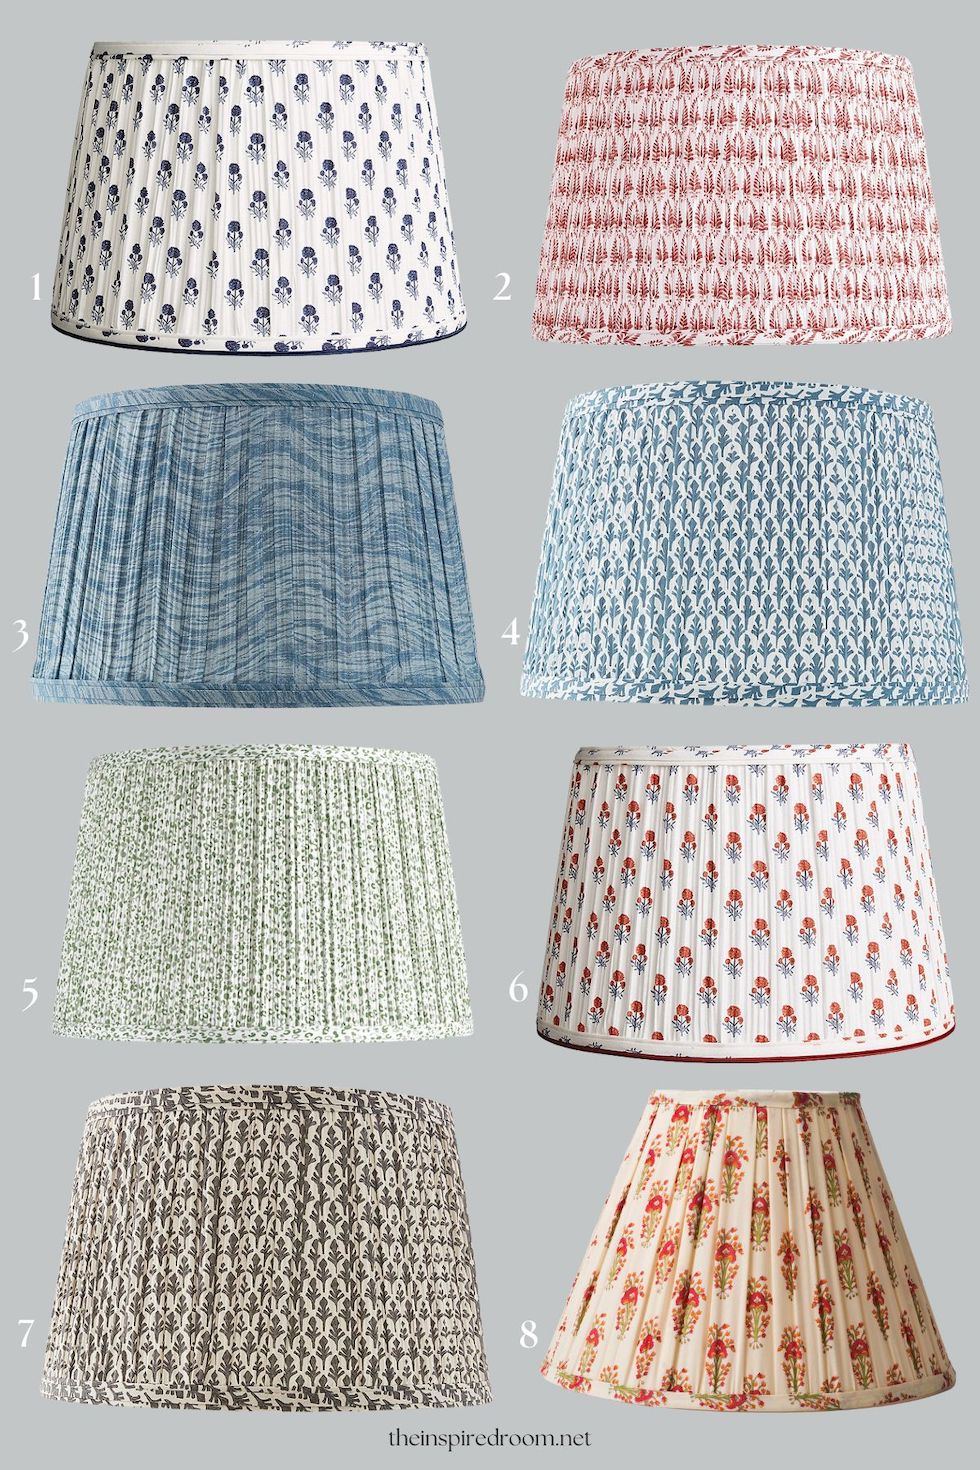 My Pleated Patterned Lampshades + Sources